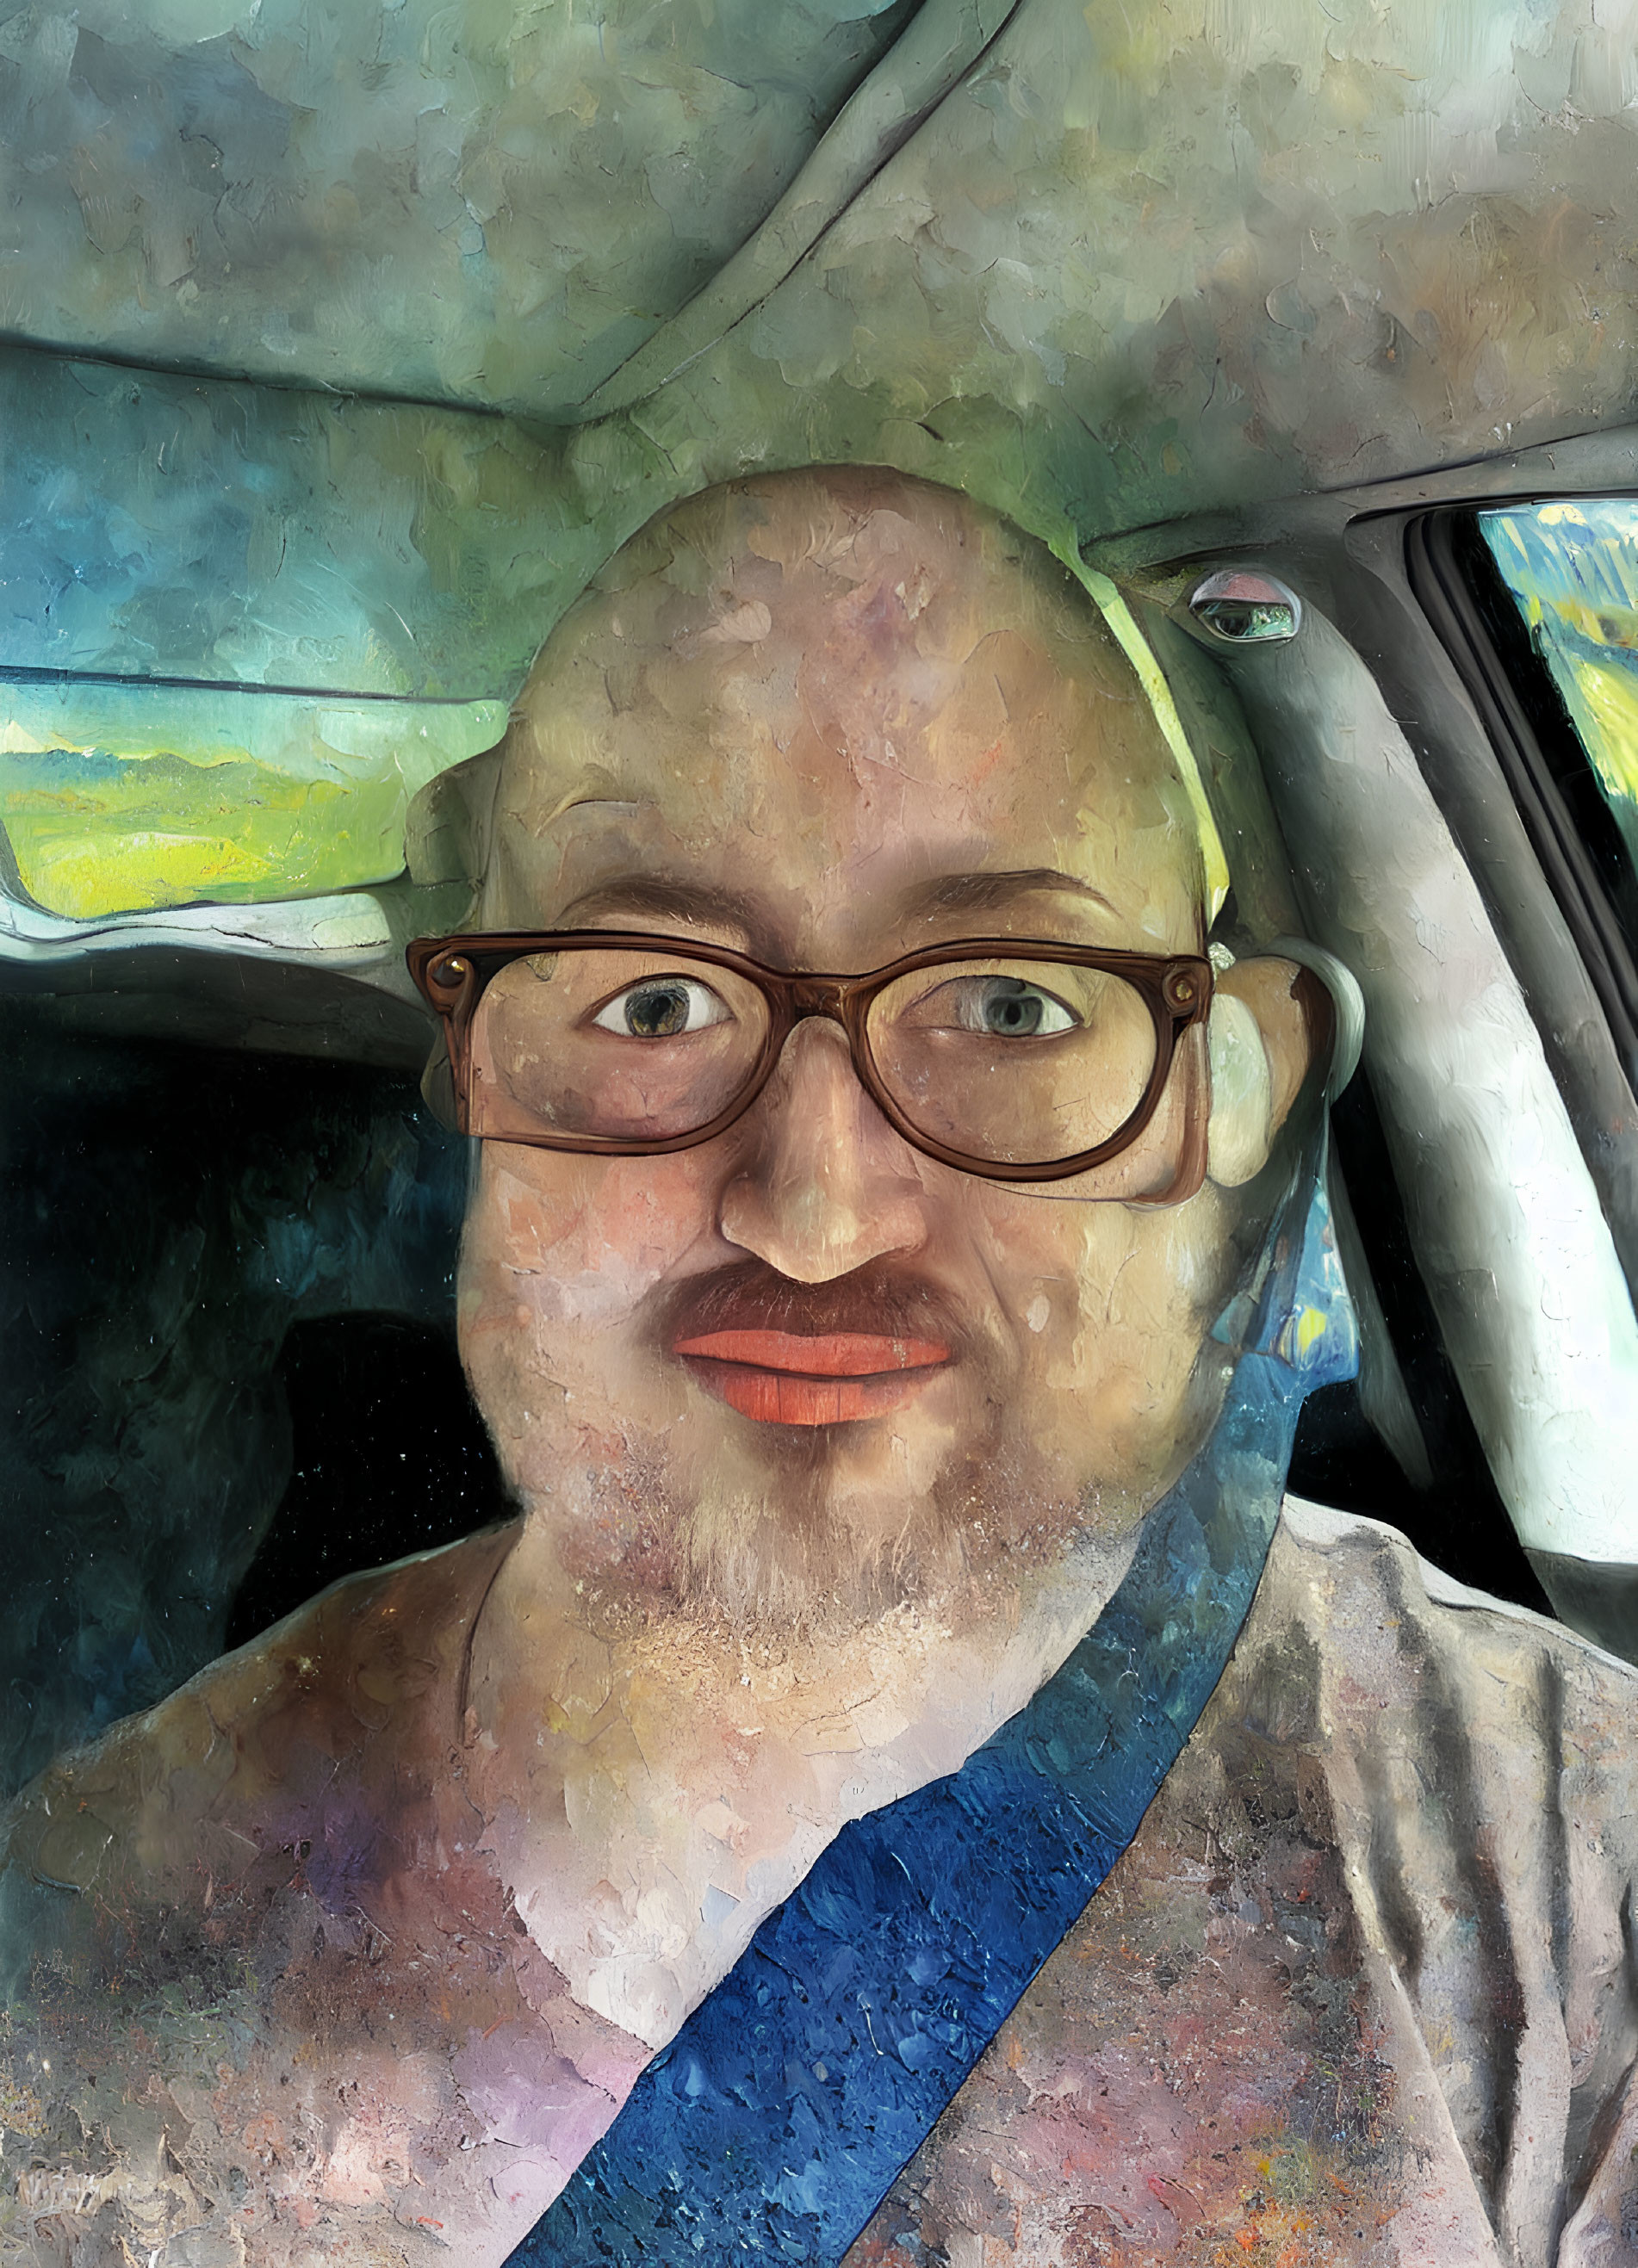 Colorful portrait of a person with glasses in a car with expressive brushwork.